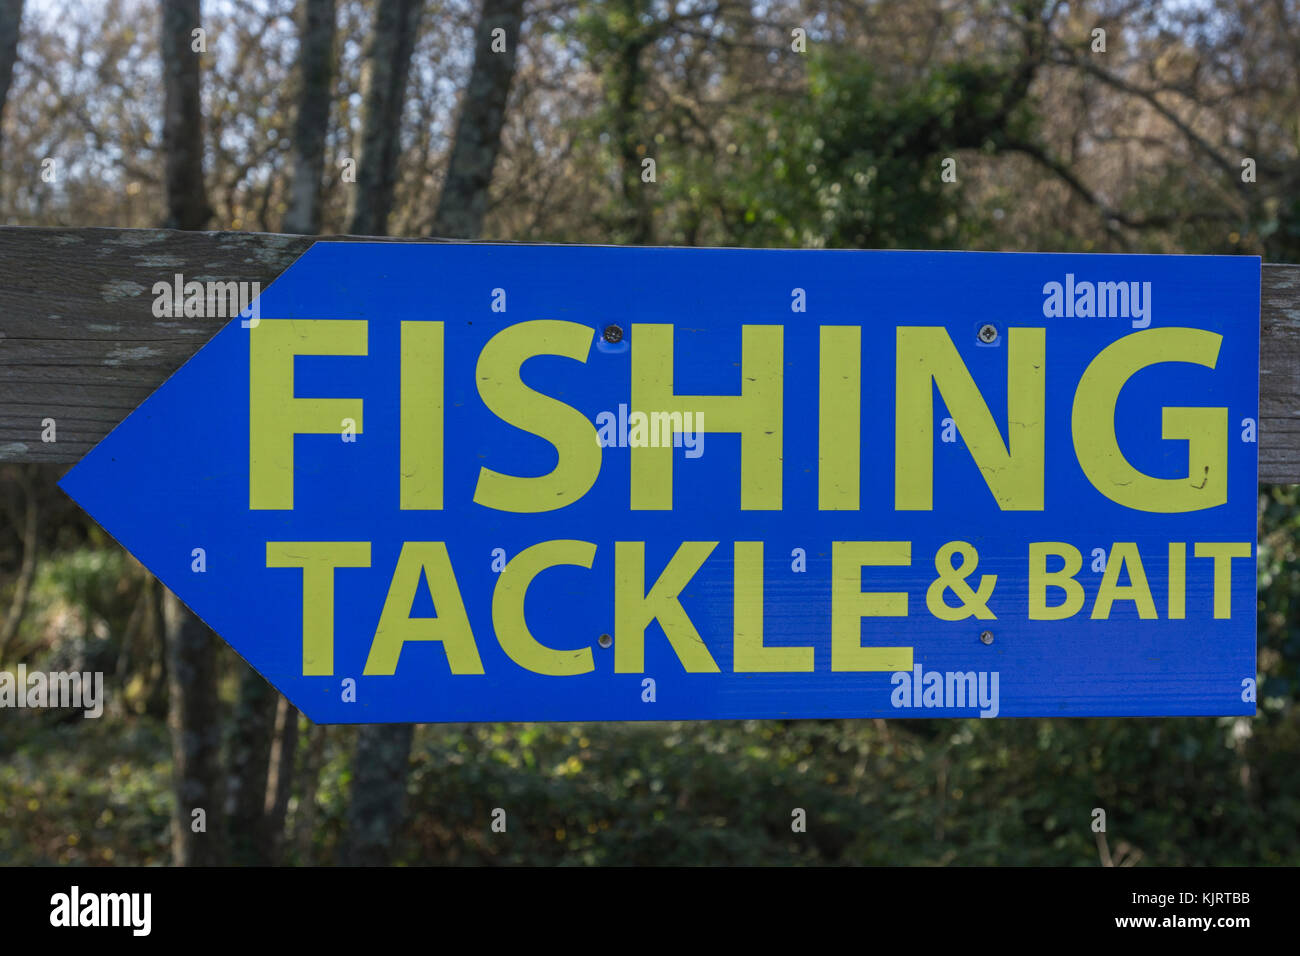 Sign pointing to a Fishing tackle and bait shop / supplier. In the